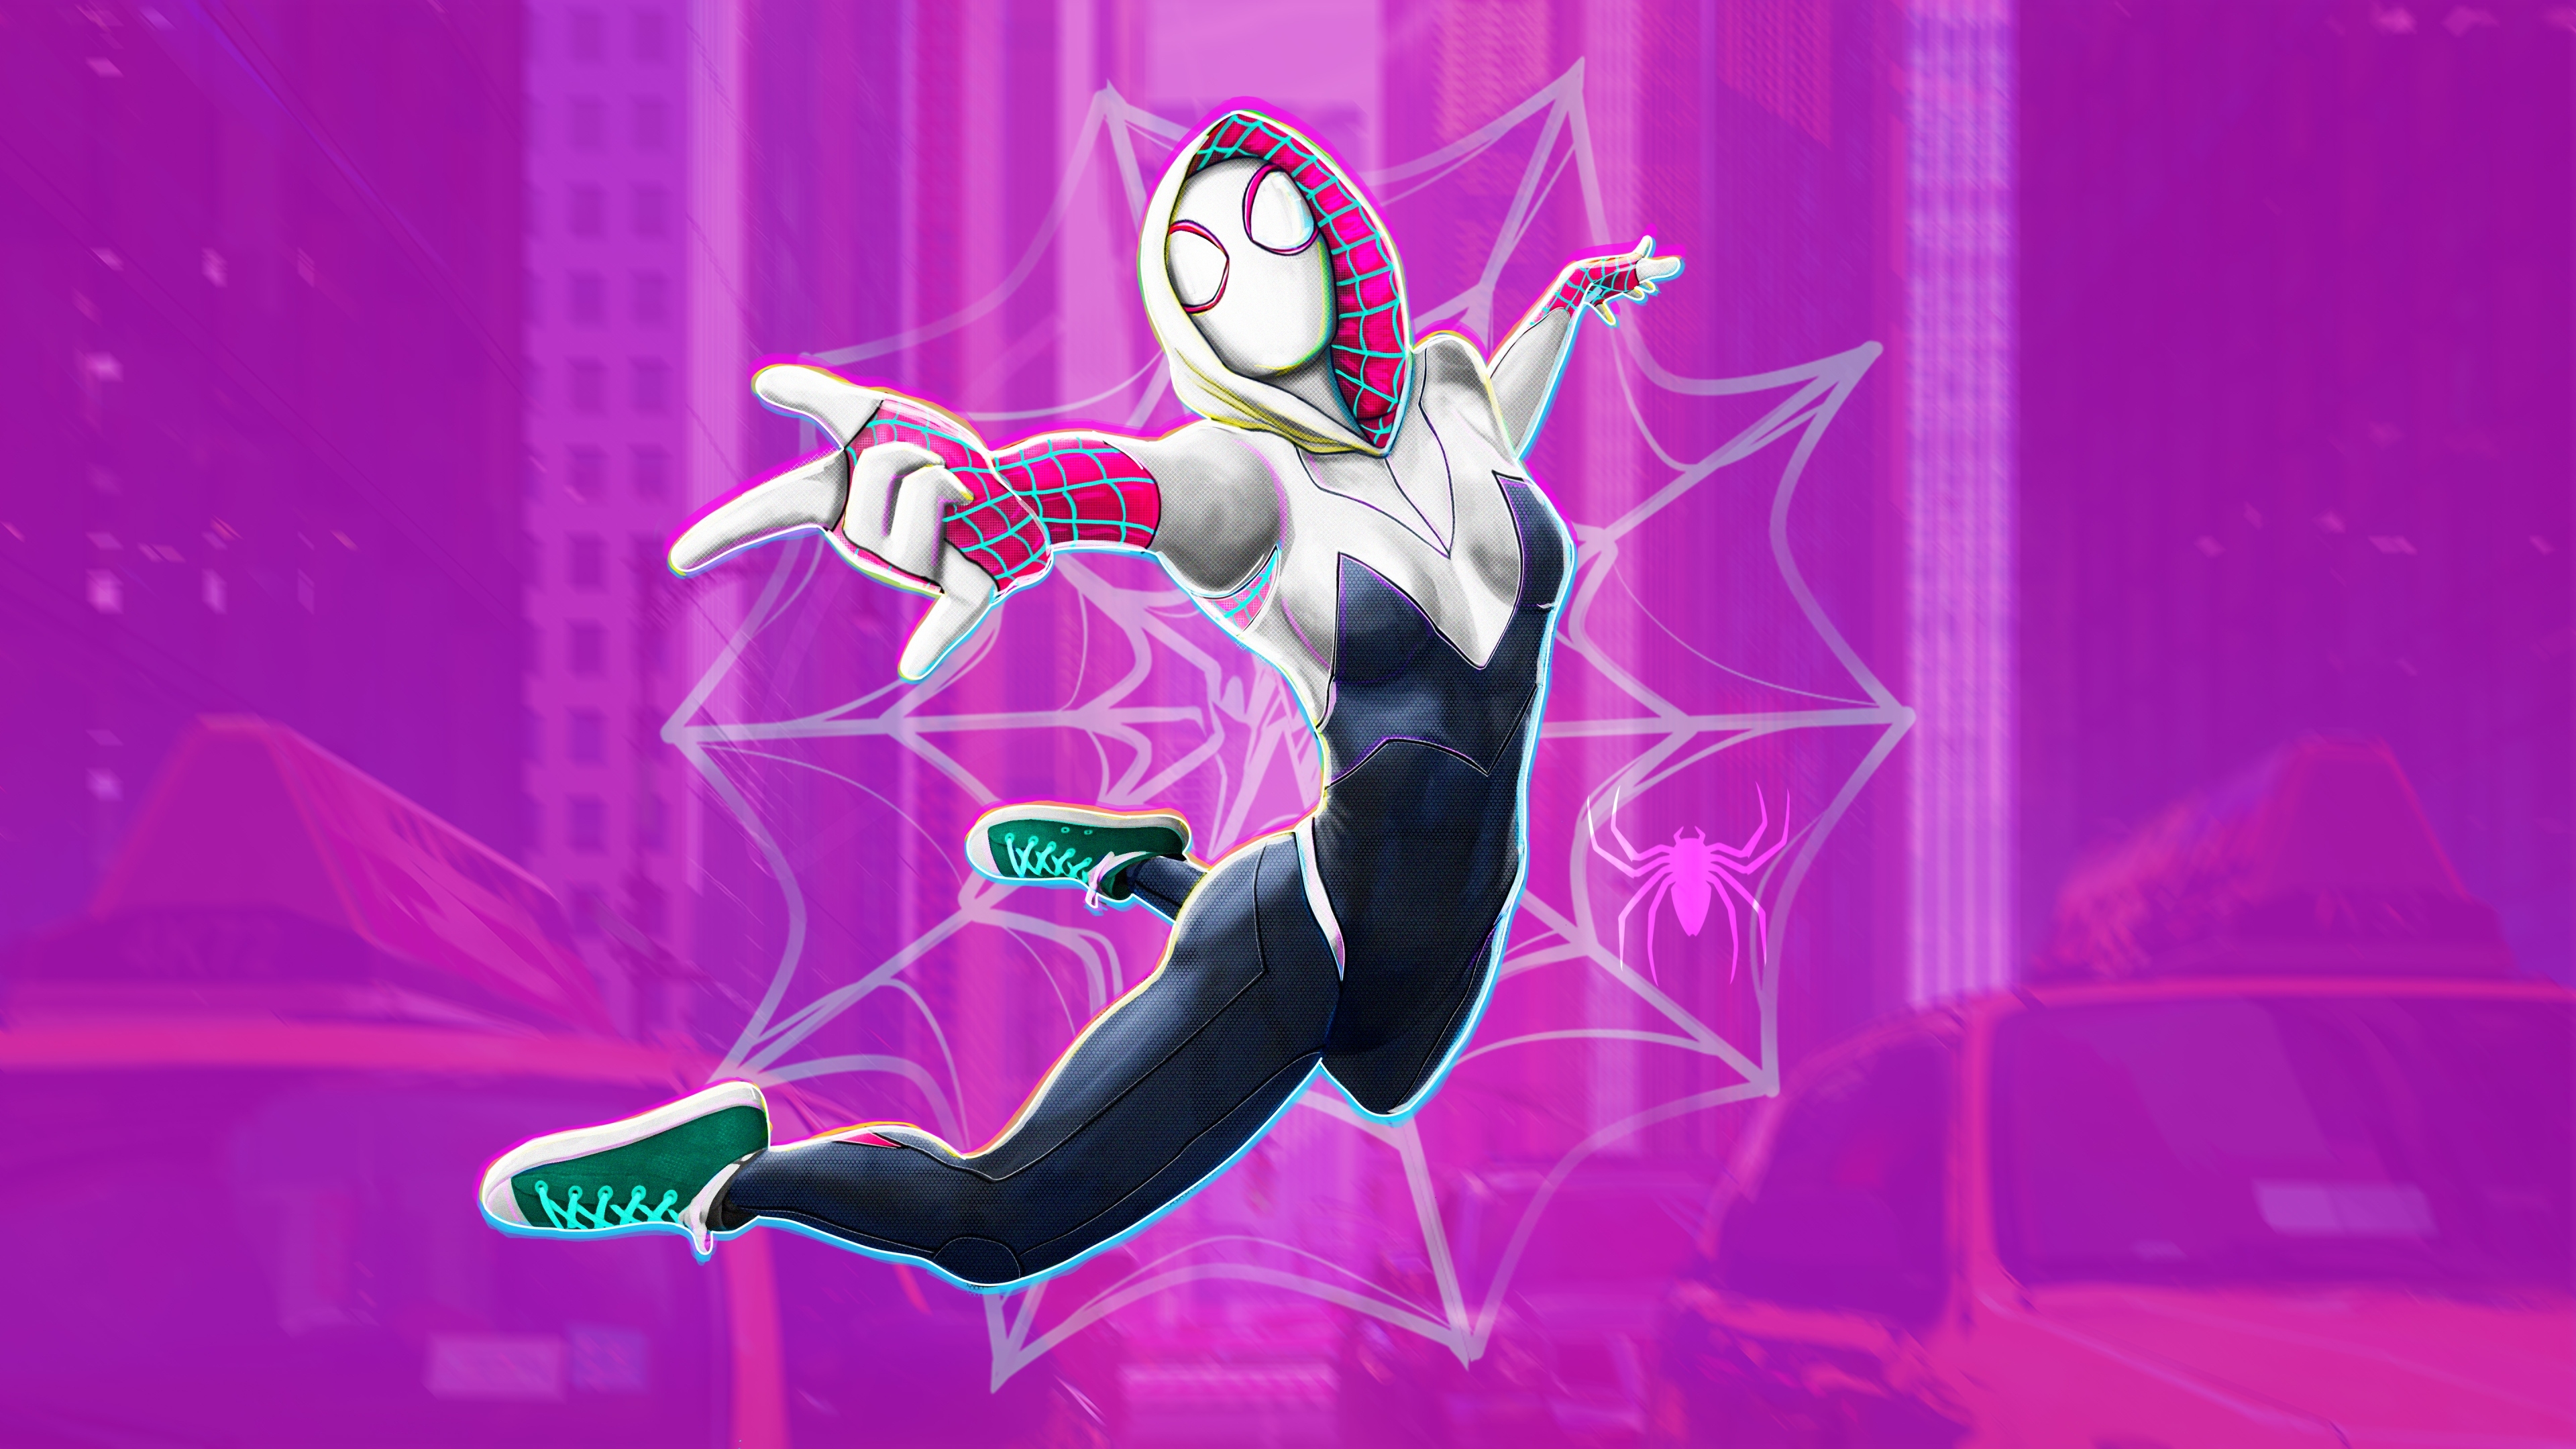 HD spider man: into the spider verse wallpapers | Peakpx